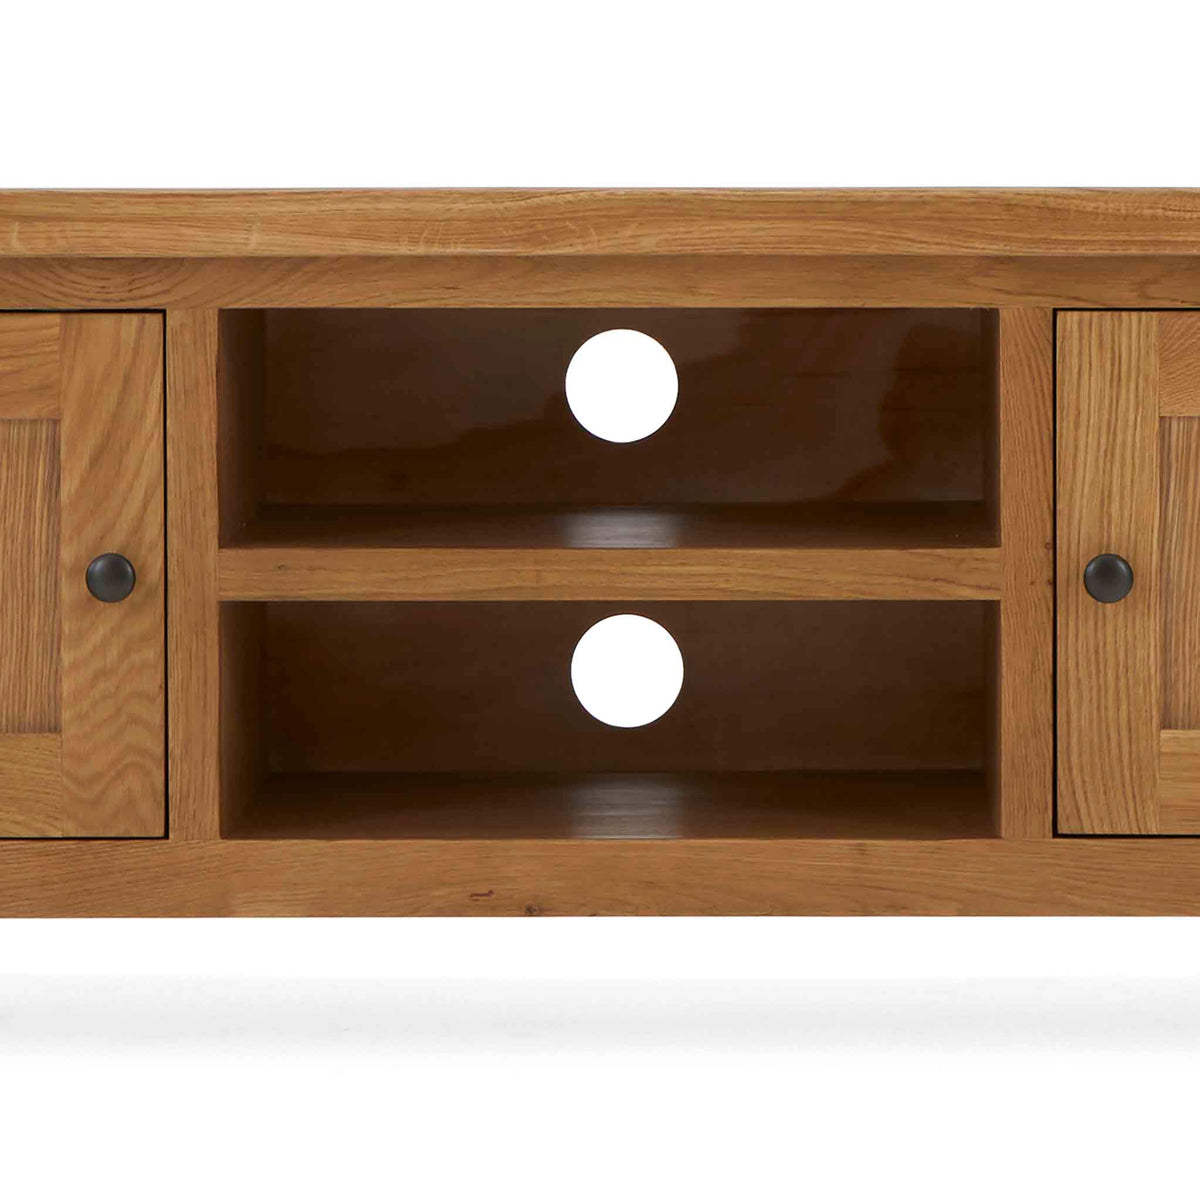 Zelah Oak 120cm TV Stand - Close up of shelving and cable access holes